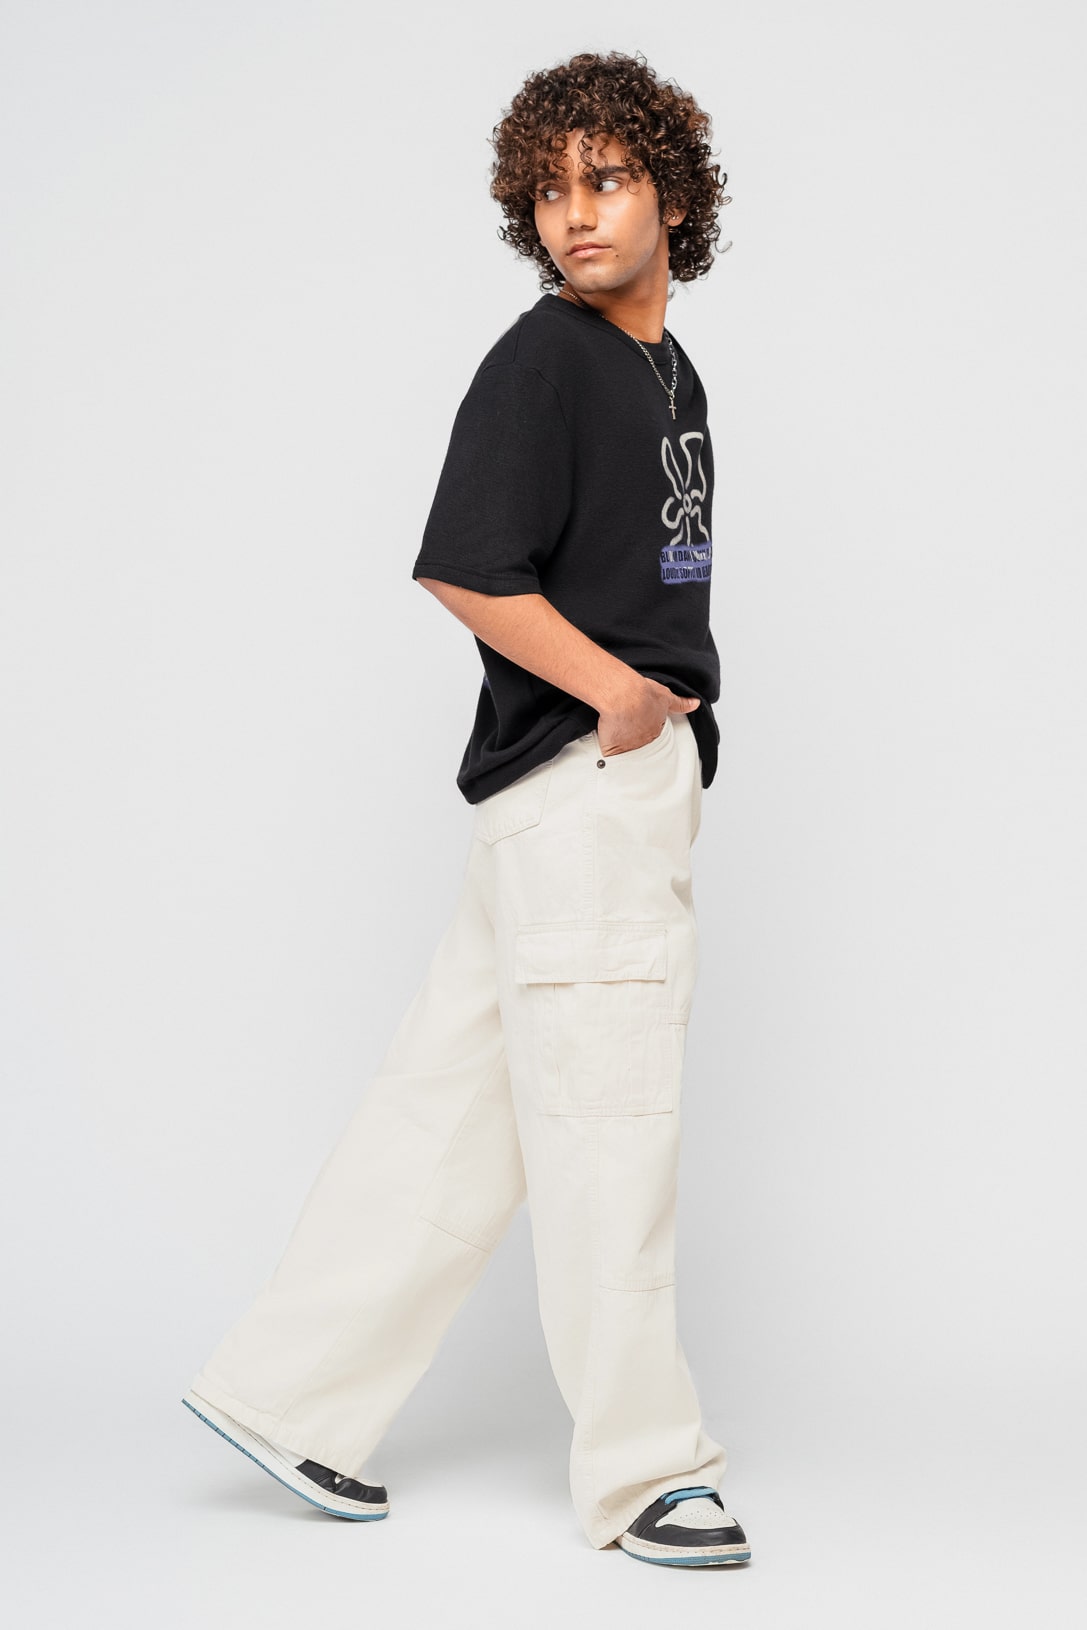 Buy White Trousers & Pants for Men by The Indian Garage Co Online | Ajio.com